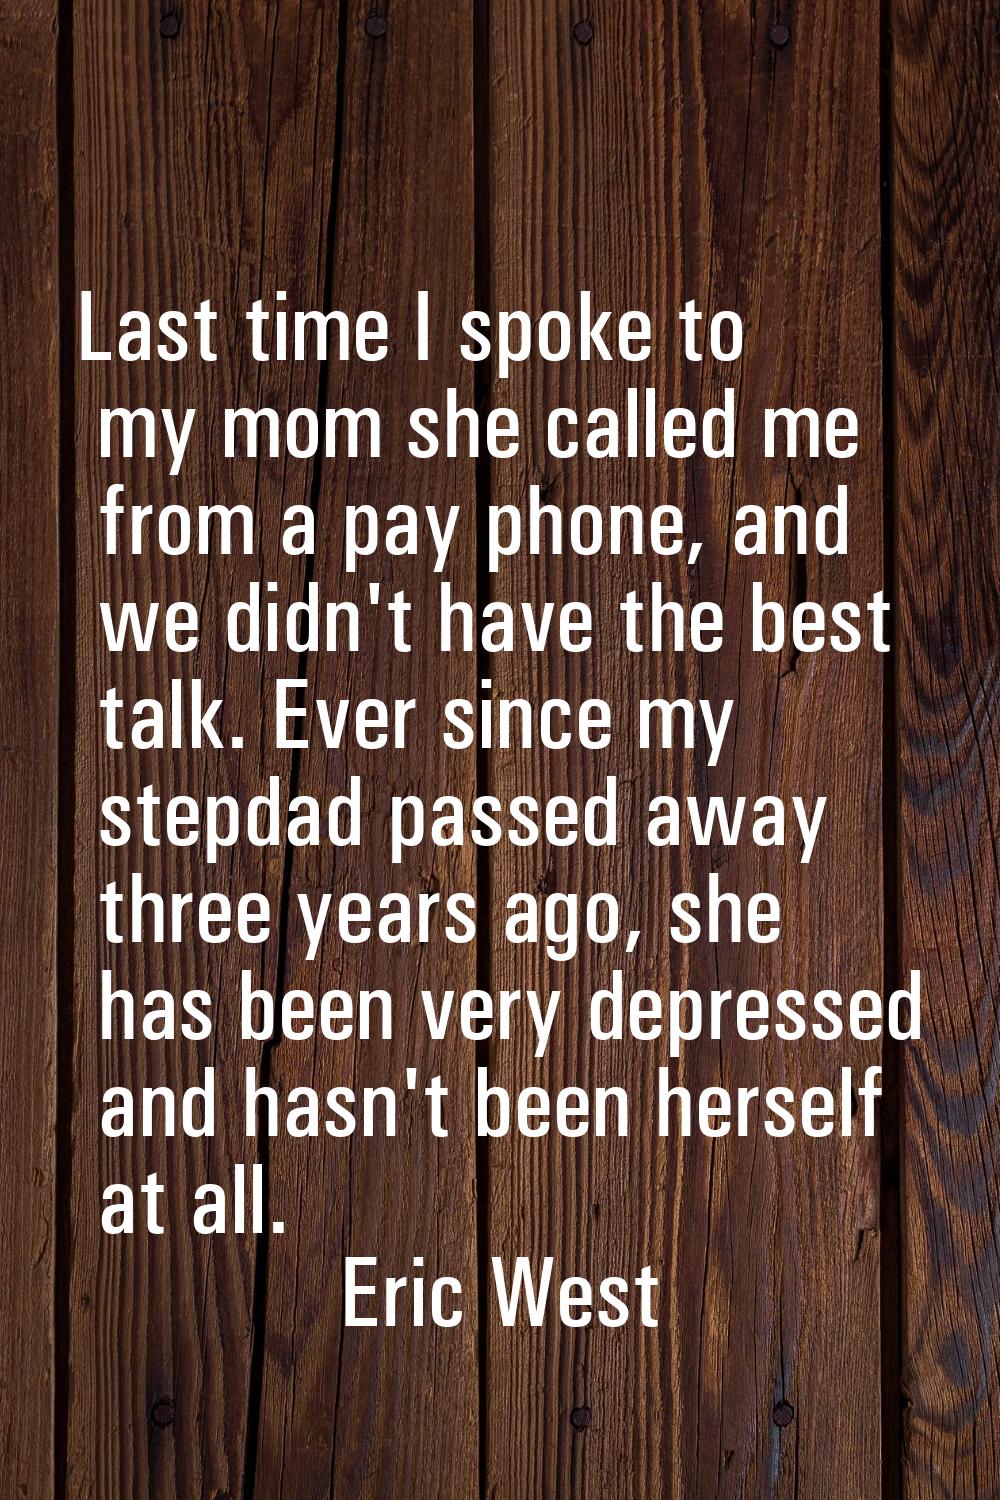 Last time I spoke to my mom she called me from a pay phone, and we didn't have the best talk. Ever 